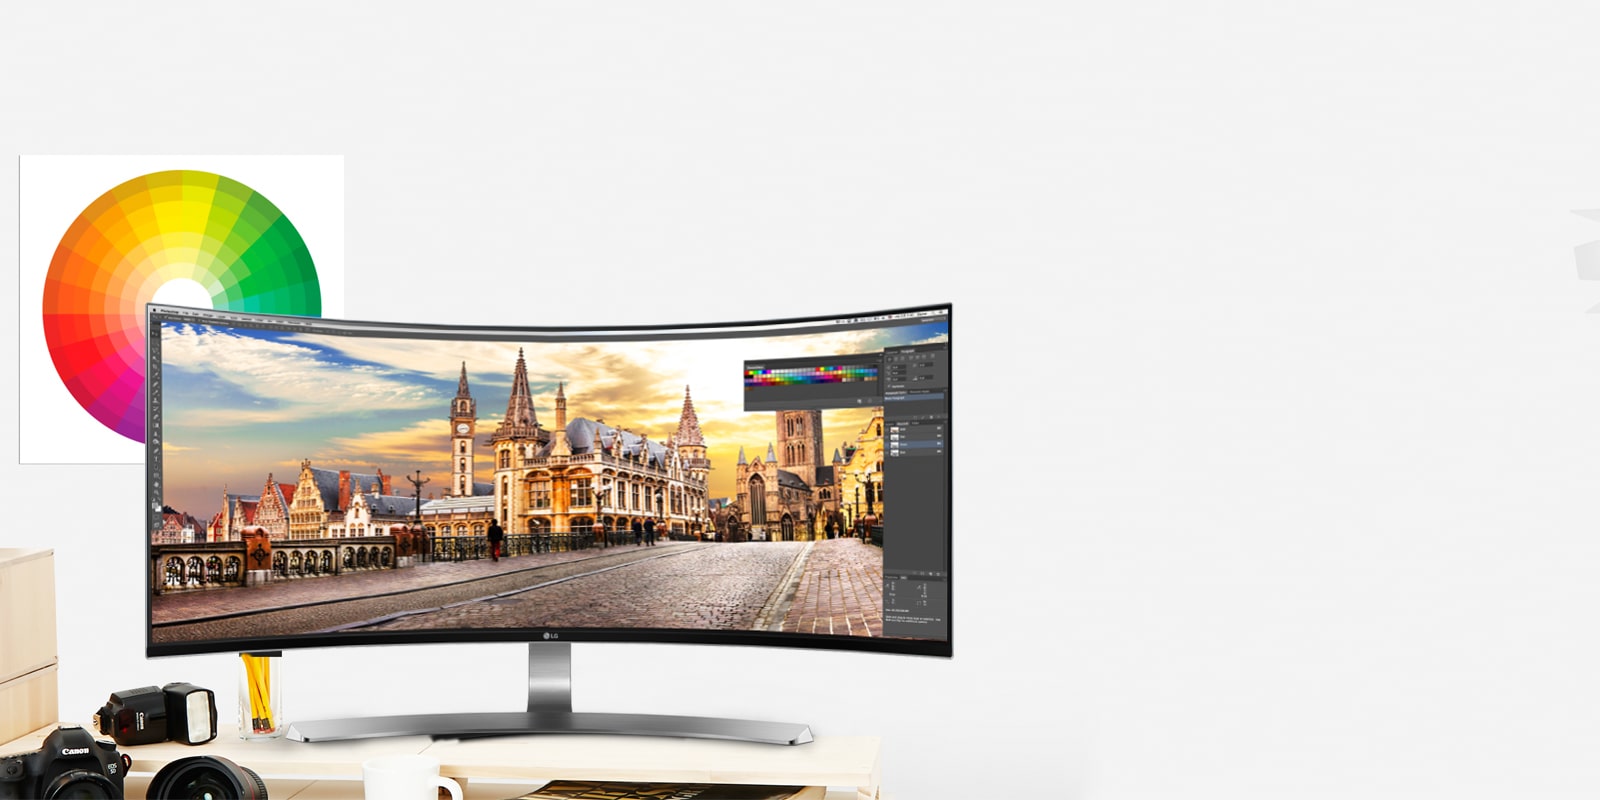 Unboxing y review del Monitor Panorámico LG 34UC98 WIDE - 